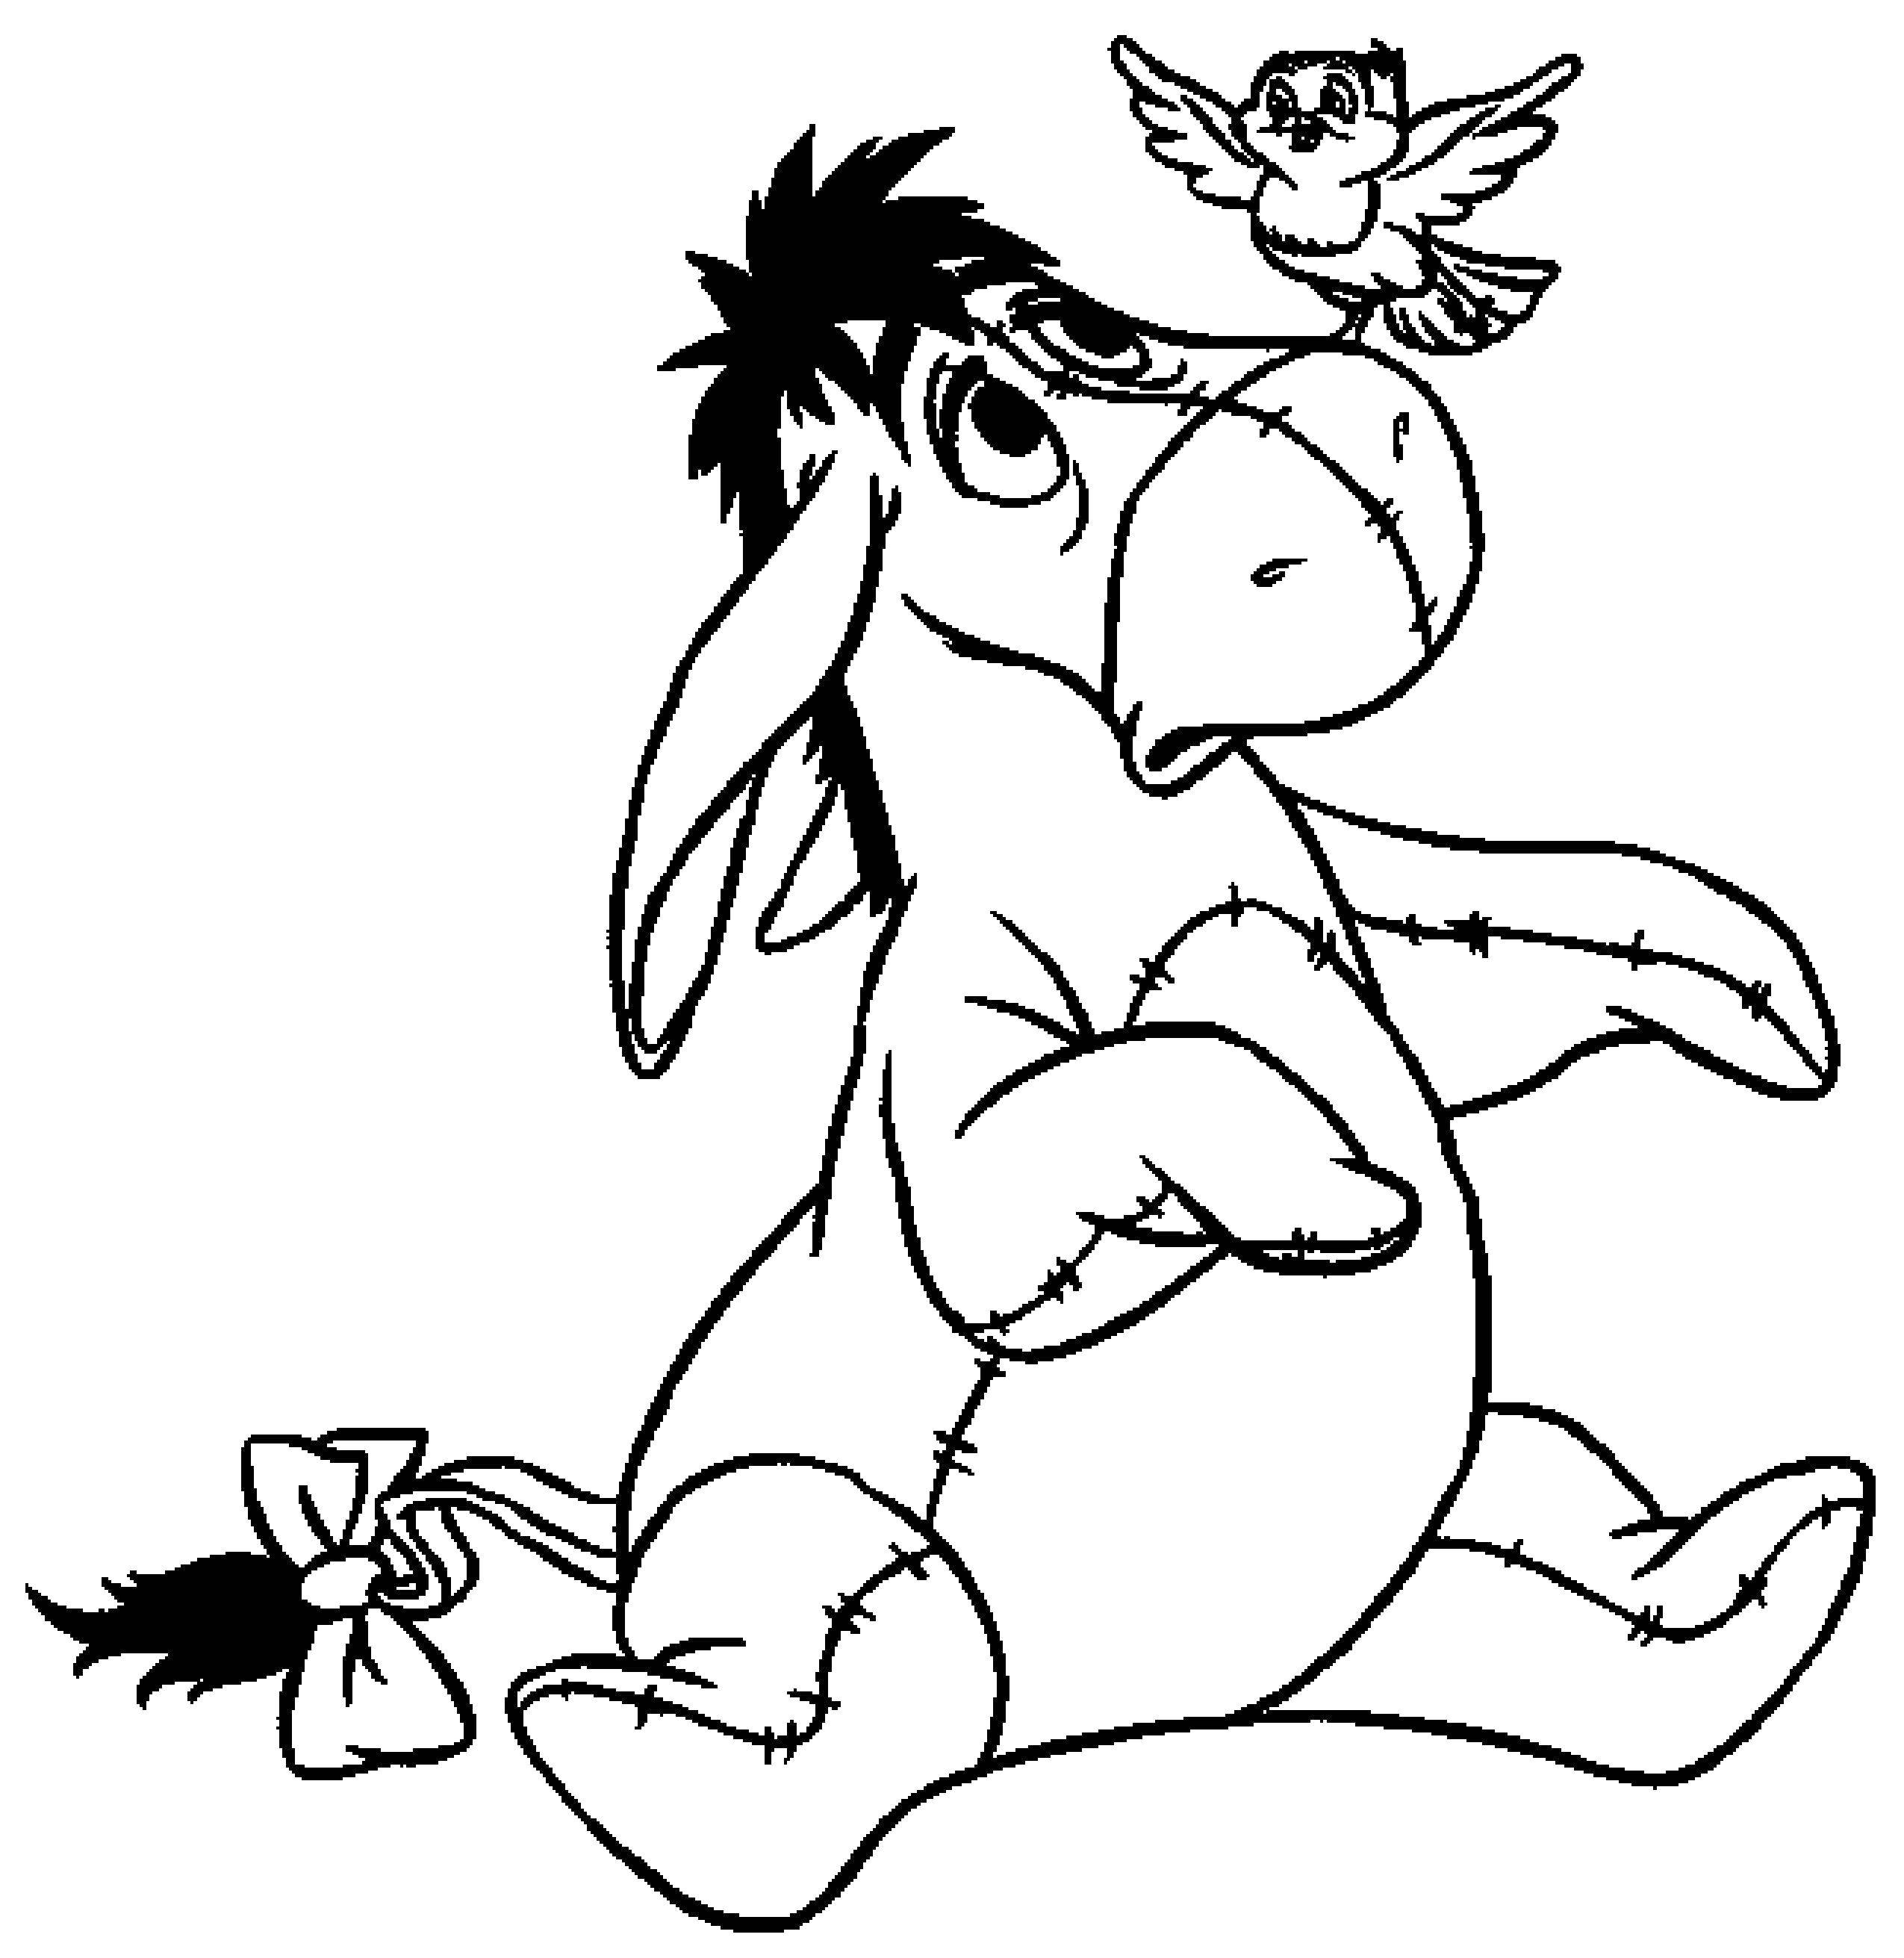 Coloring Eeyore from Winnie the Pooh . Category cartoons. Tags:  Cartoon character, Winnie the Pooh, Eeyore.